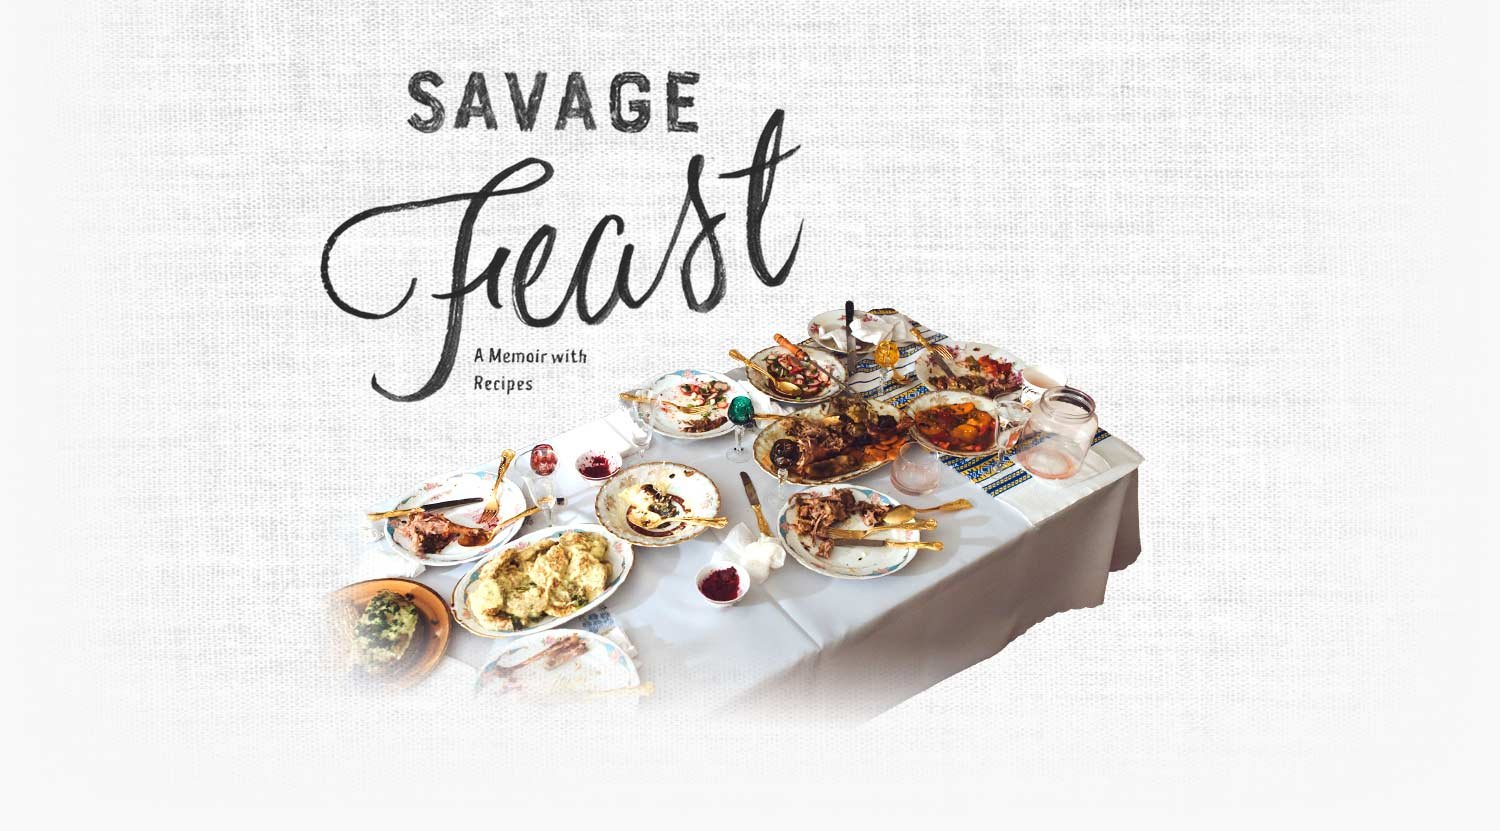 Savage Feast cover background. photo of a table with a white table cloth set for a feast.